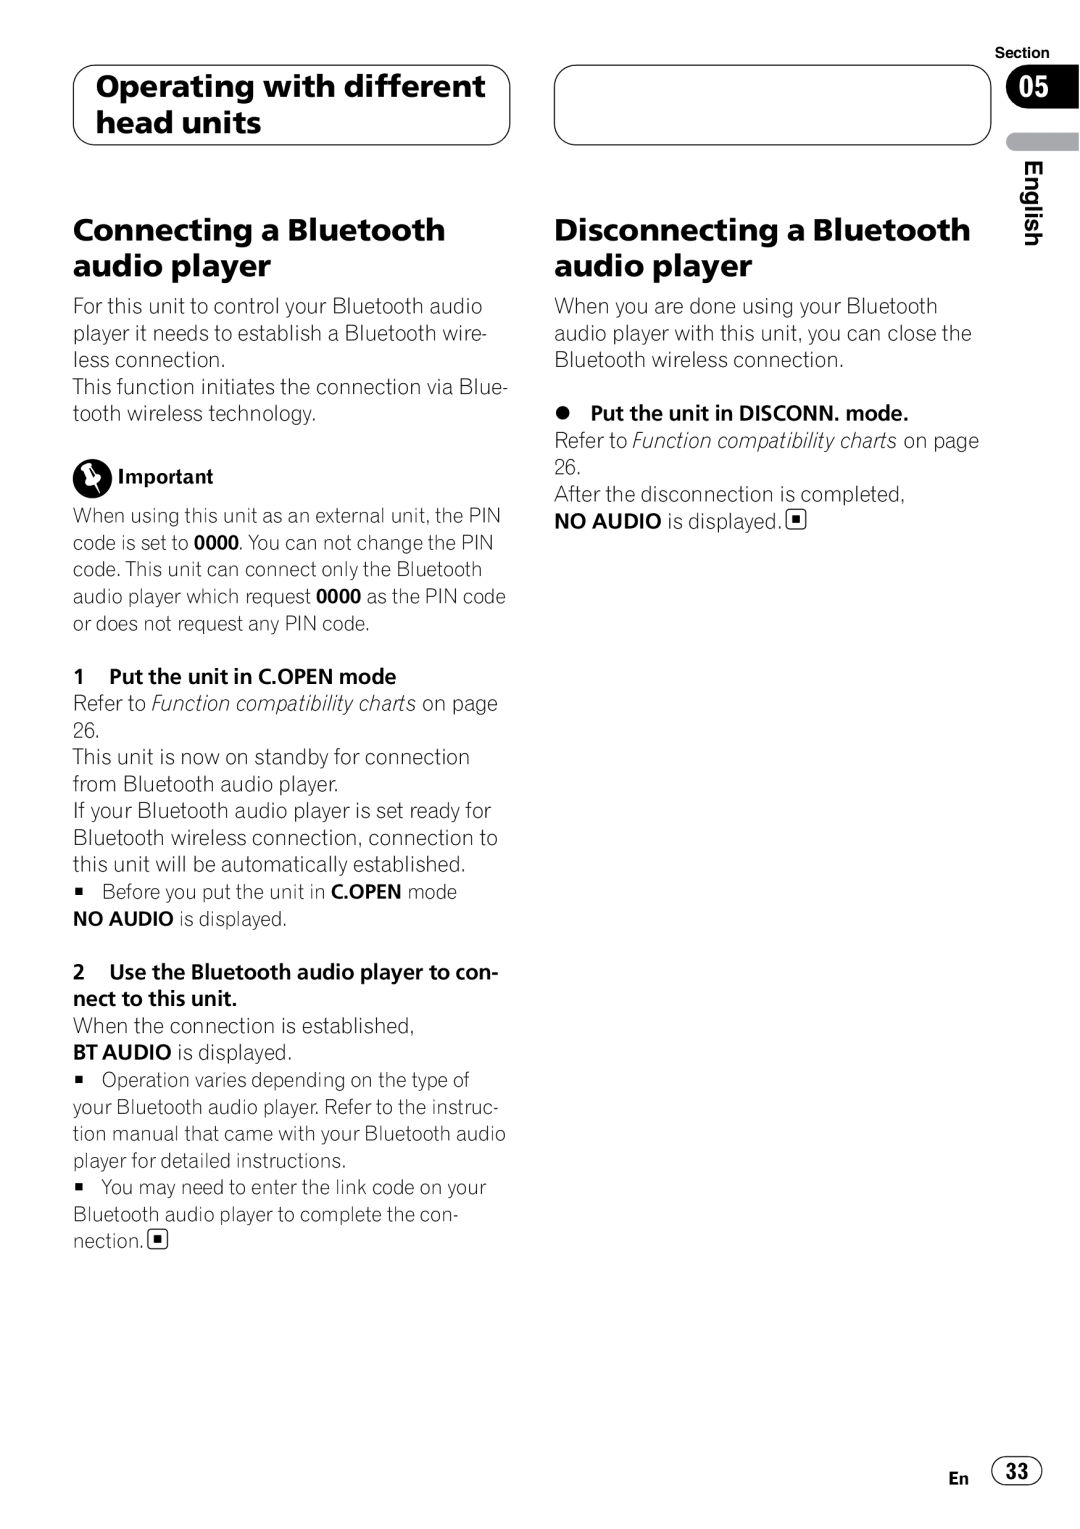 Pioneer CD-BTB200 owner manual Disconnecting a Bluetooth audio player, Operating with different head units, English 